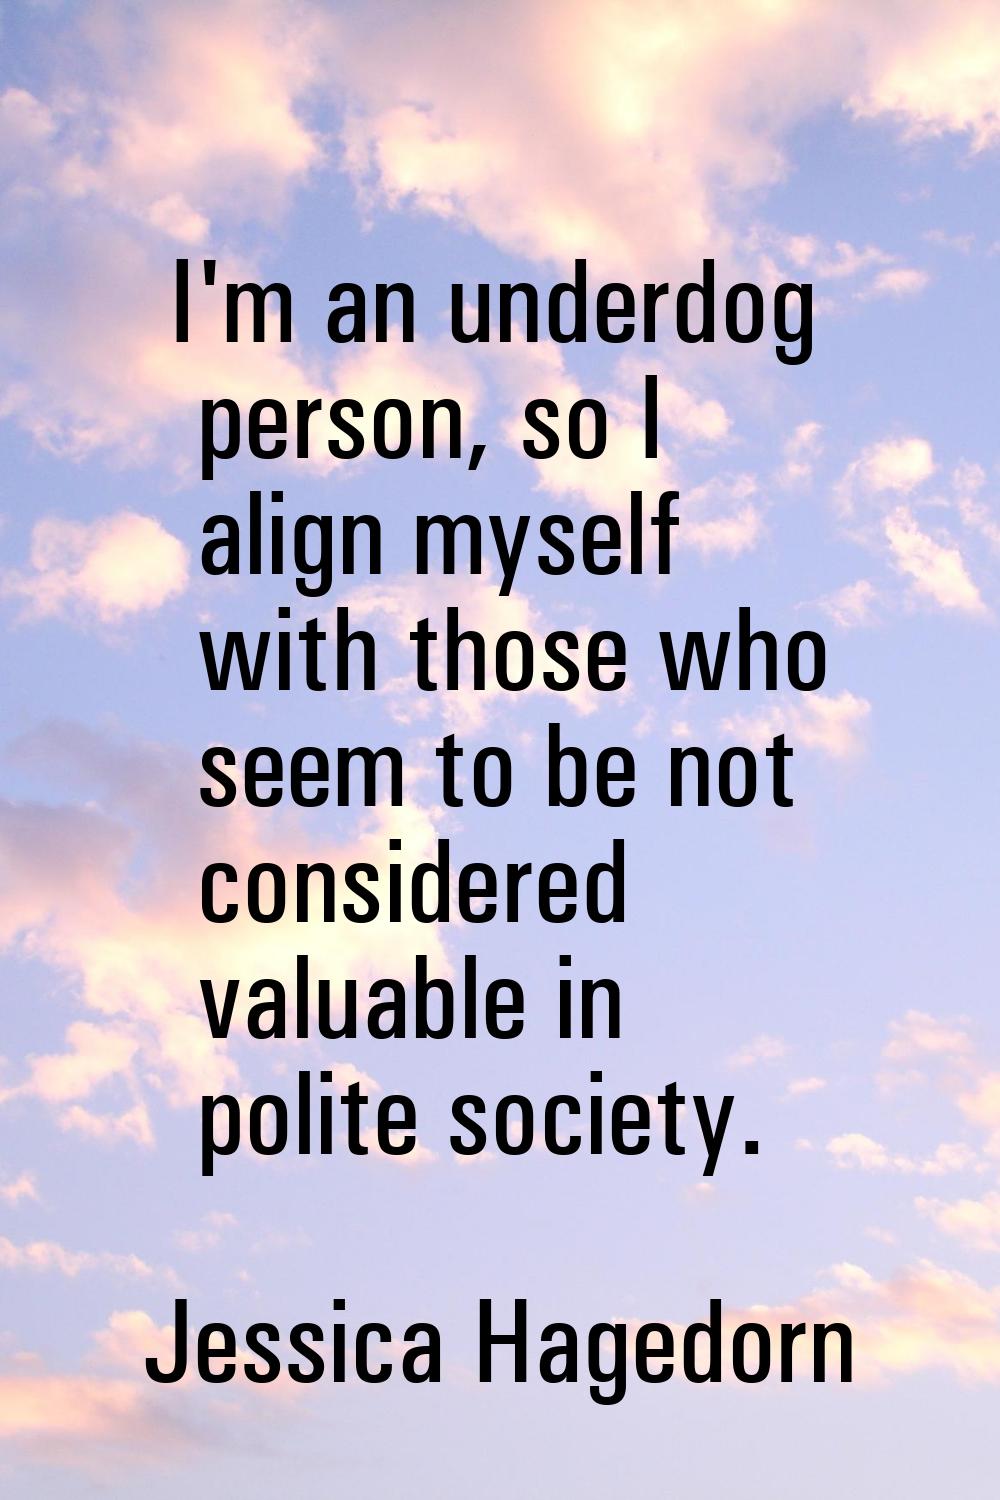 I'm an underdog person, so I align myself with those who seem to be not considered valuable in poli